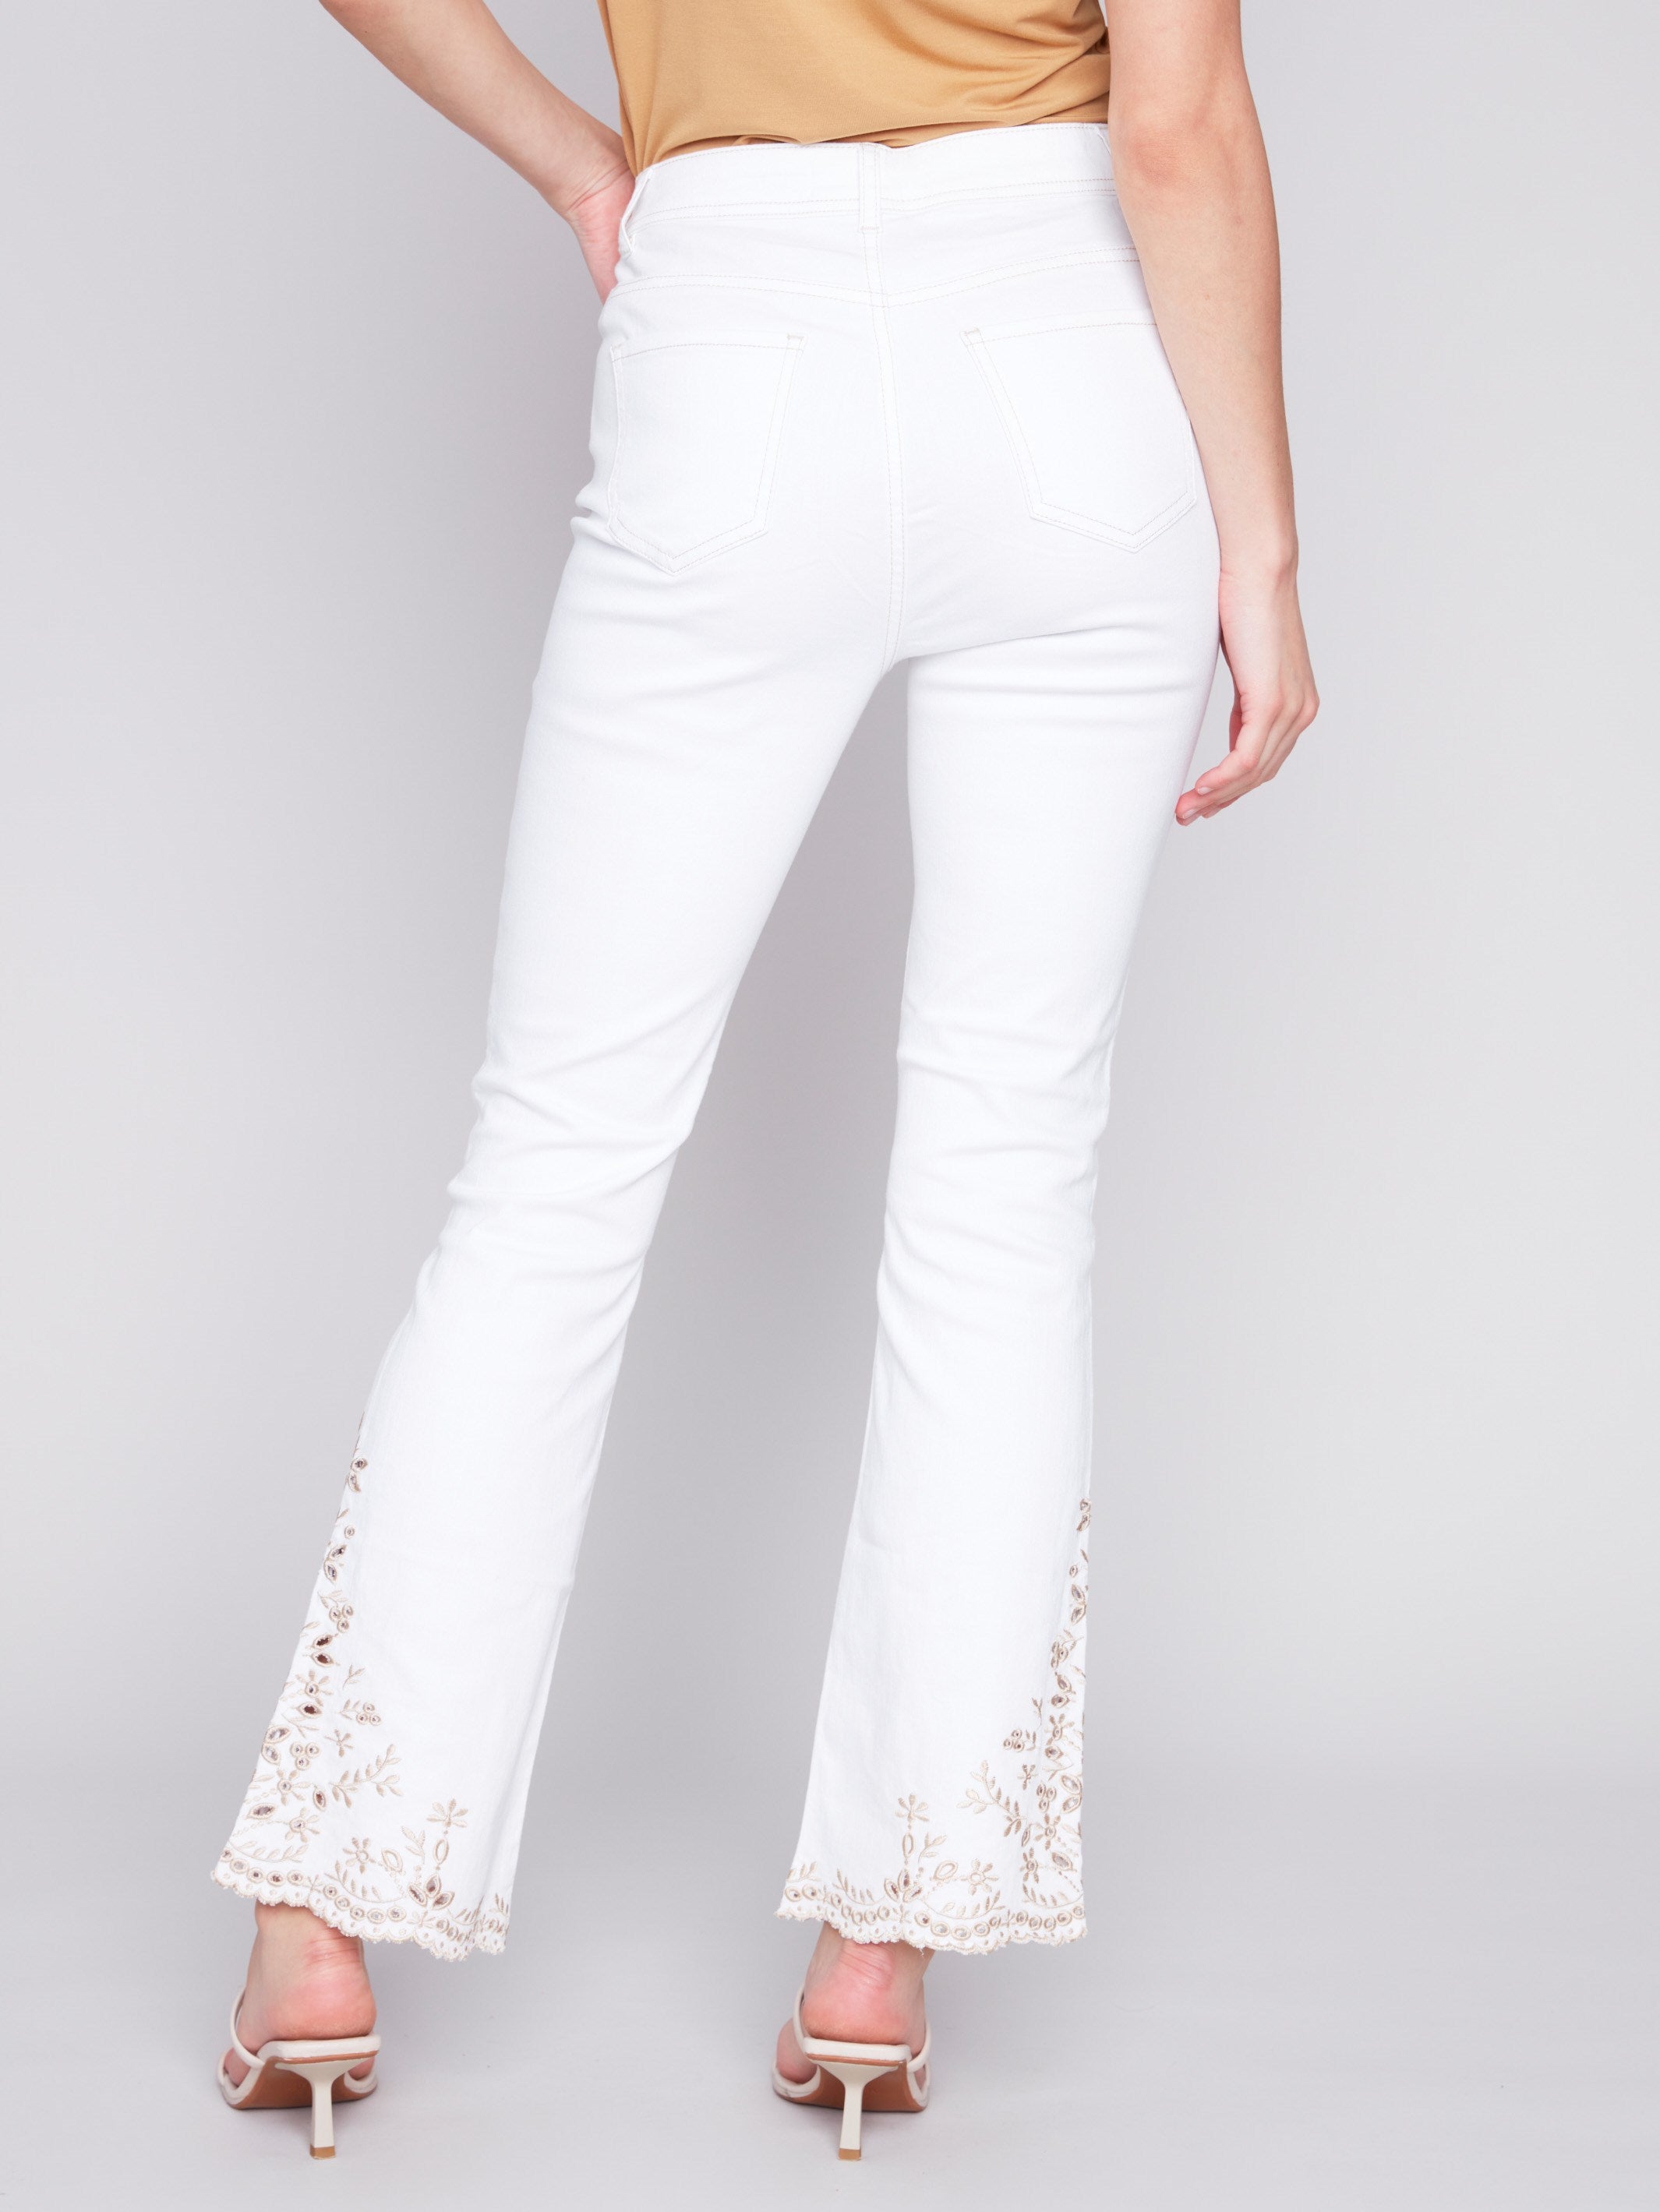 Charlie B Bootcut Twill Jeans with Embroidery - White - Image 3